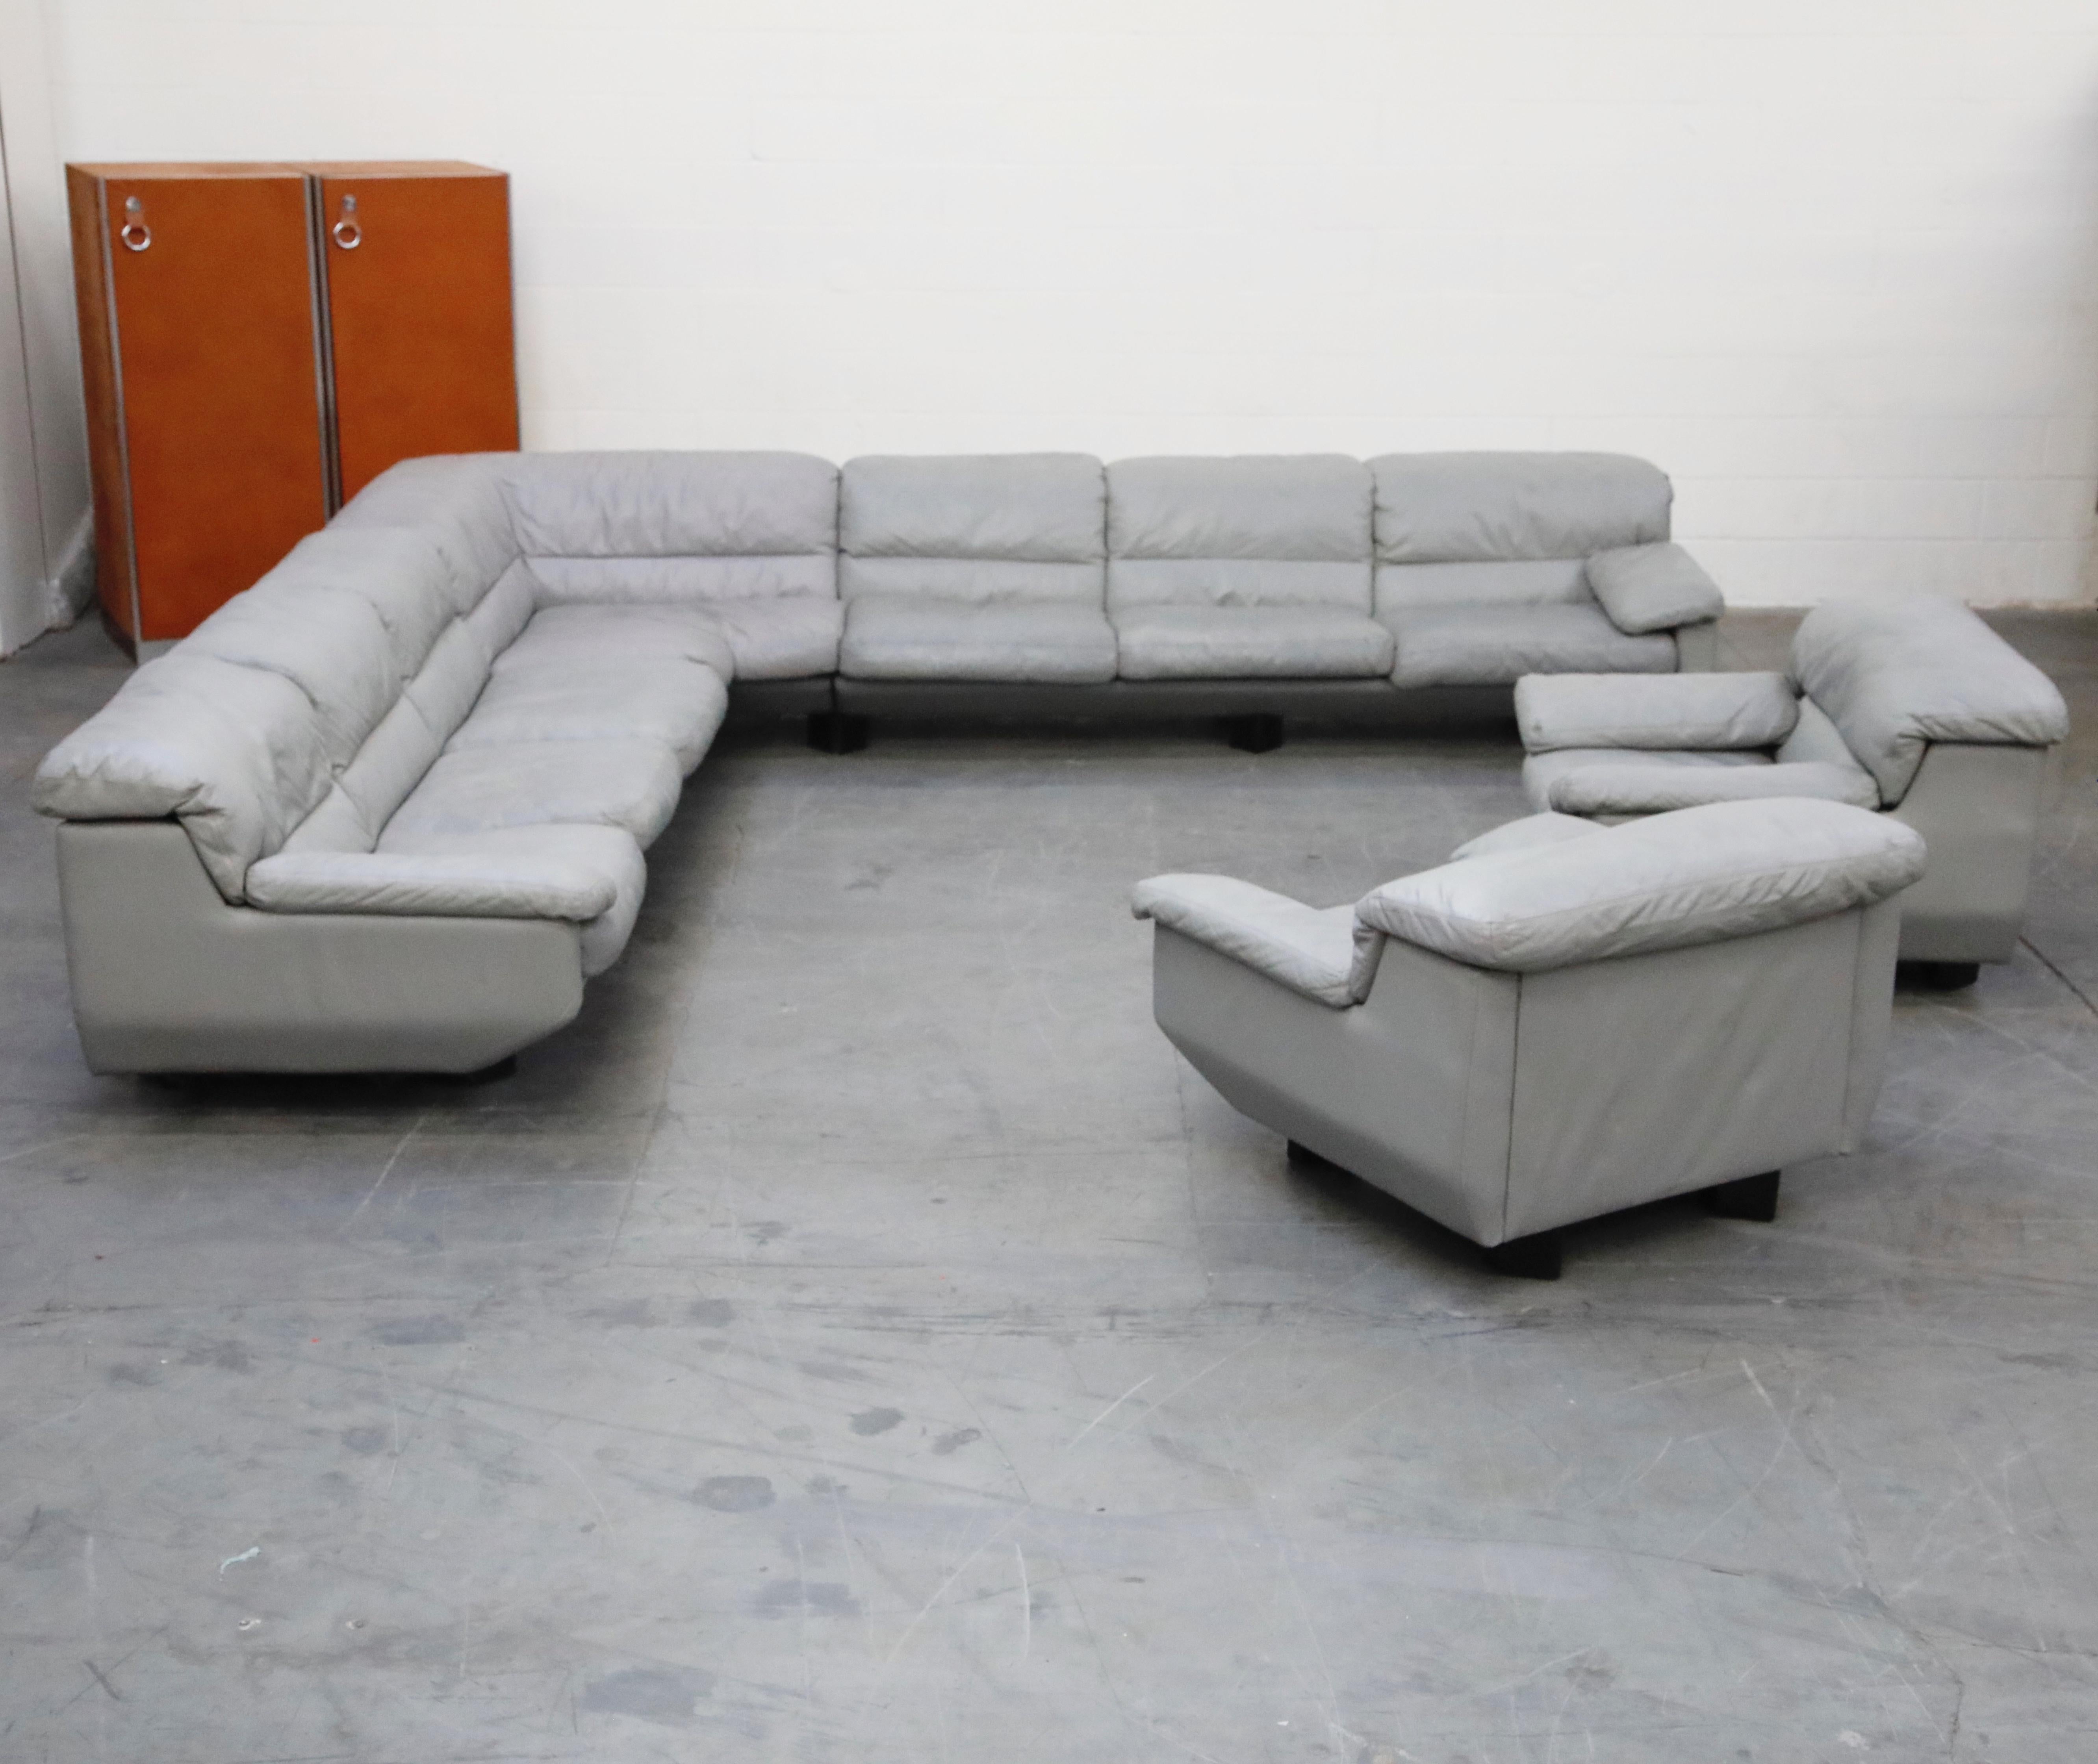 Late 20th Century Postmodern Grey Leather Modular Living Room Set by Preview, 1988, Signed